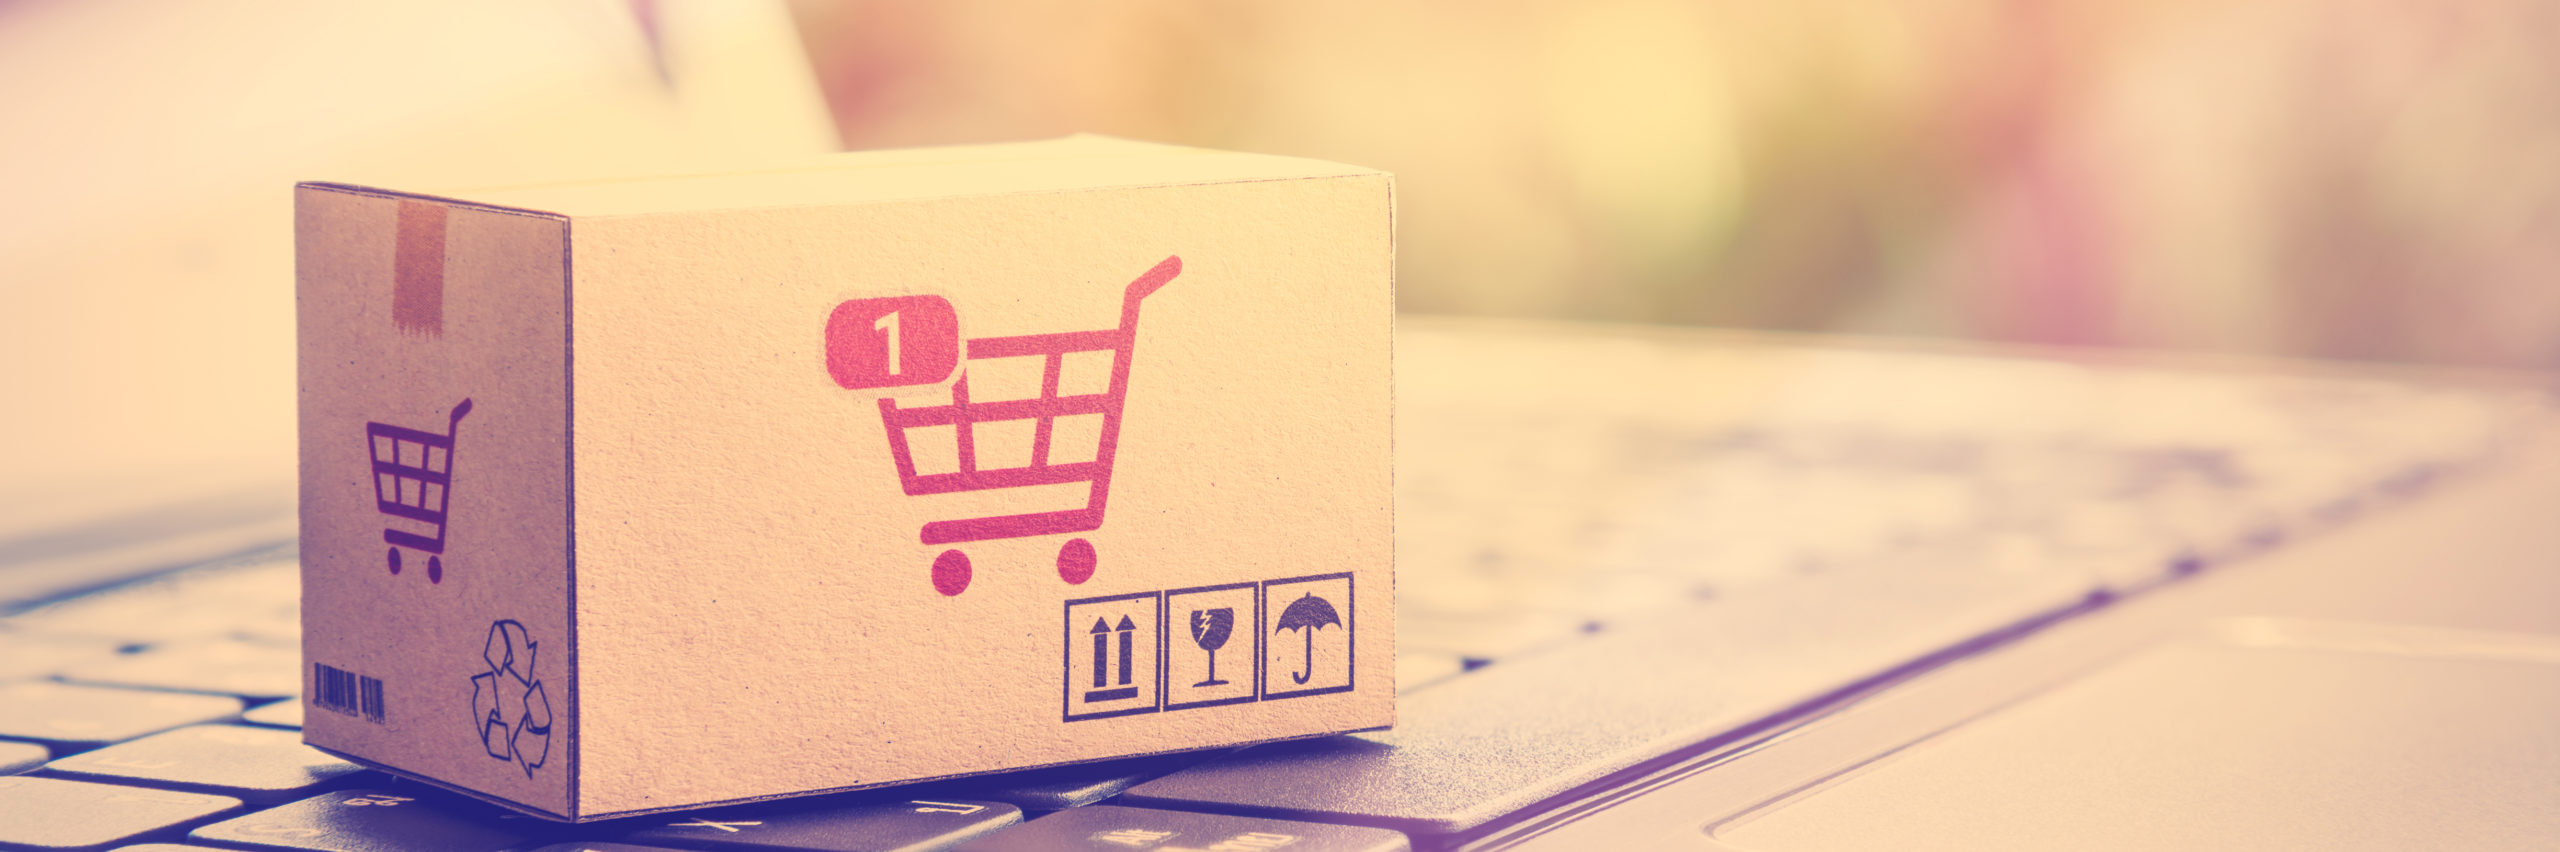 Online shopping / retail ecommerce and delivery service concept : Box with 1 item in a shopping cart sign on a laptop, depicts consumers purchase or order products from suppliers or digital stores. - Image